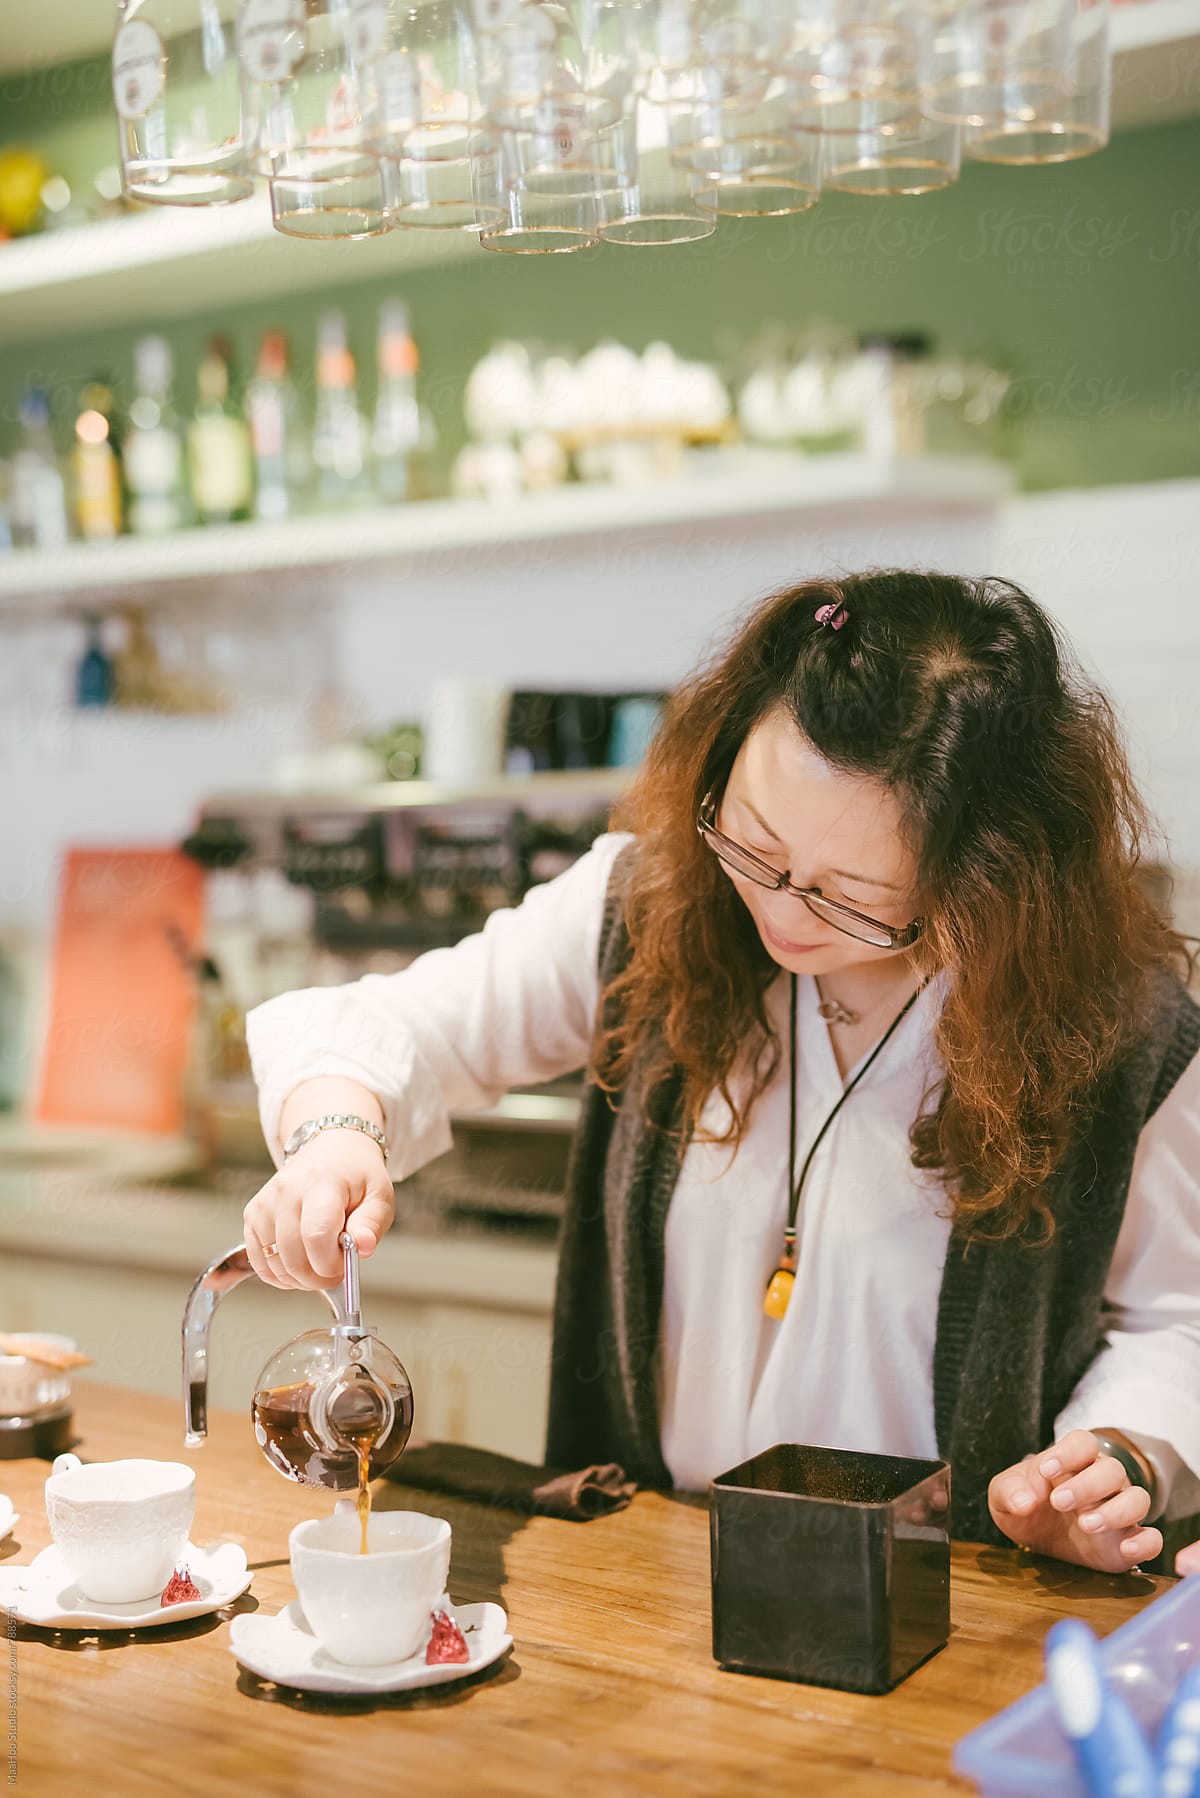 Female coffee shop owner preparing coffee at counter